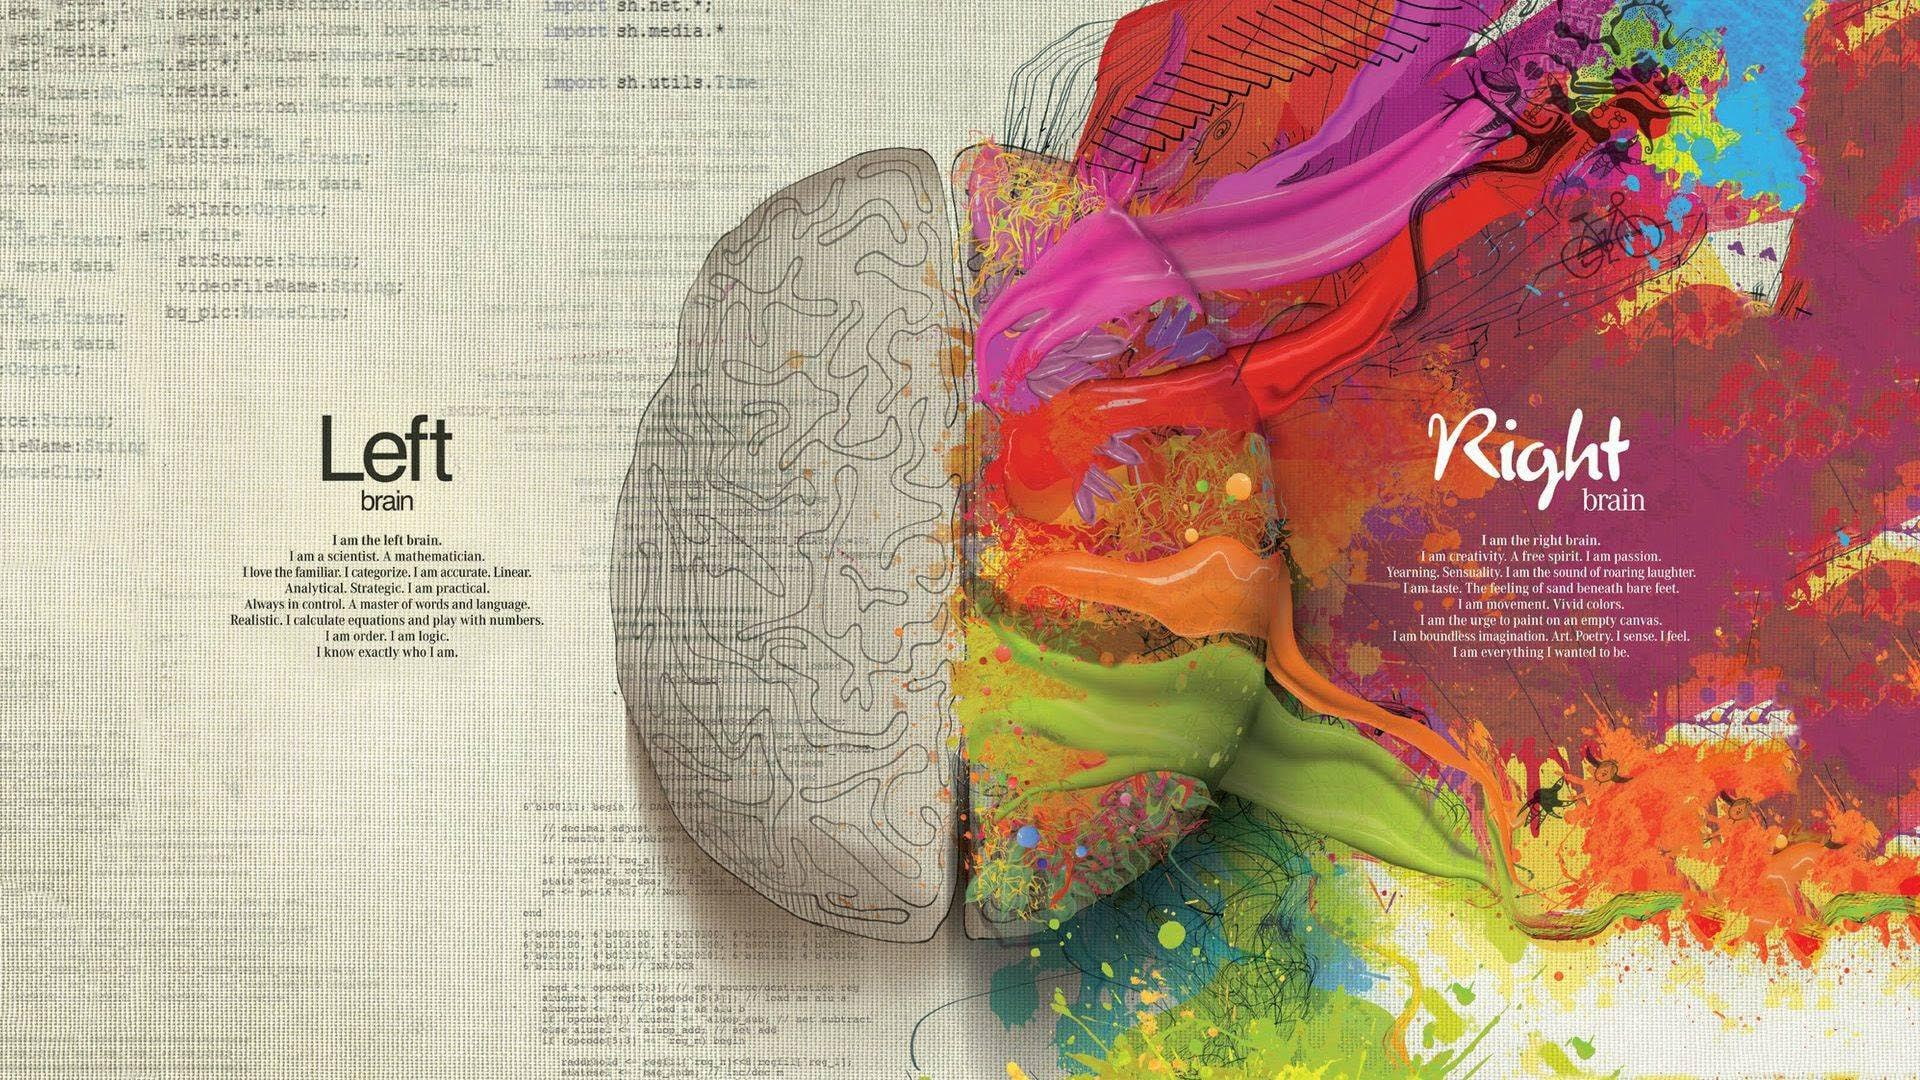 Left and Right Brain HD, brain left and right illustration, creative